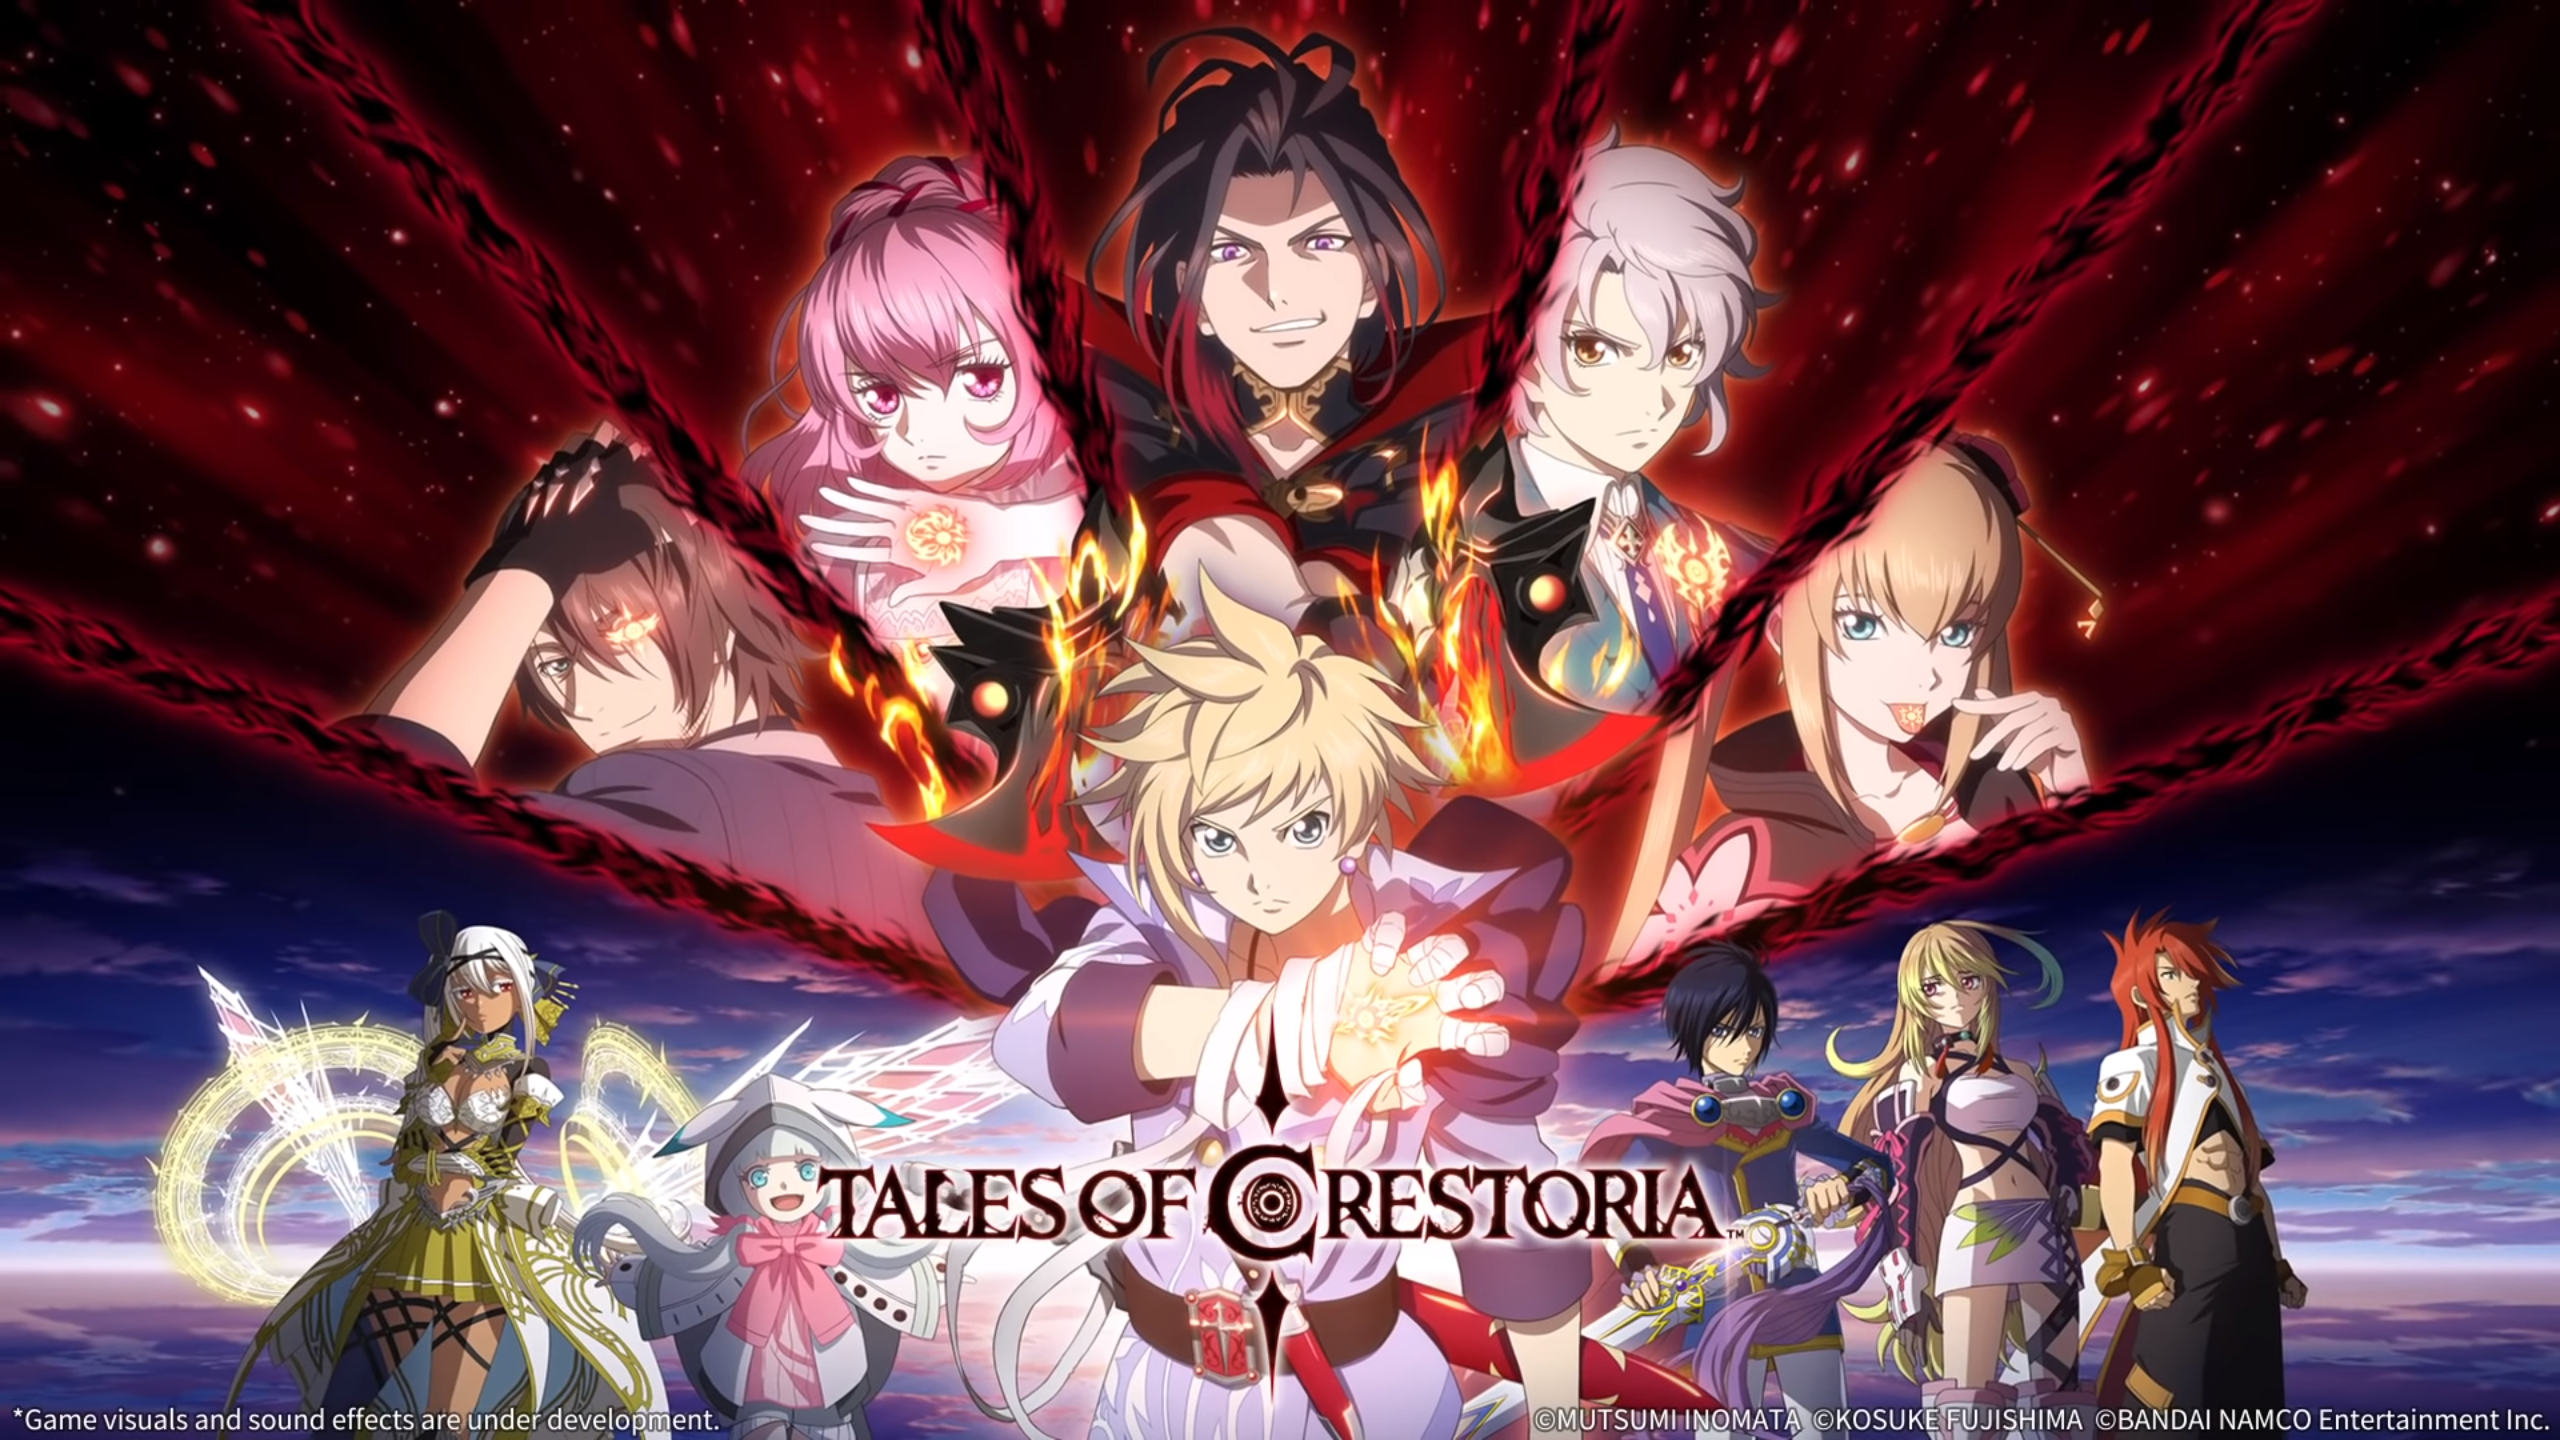 Final Tales of Crestoria Trailer Offers Insight Into How Its